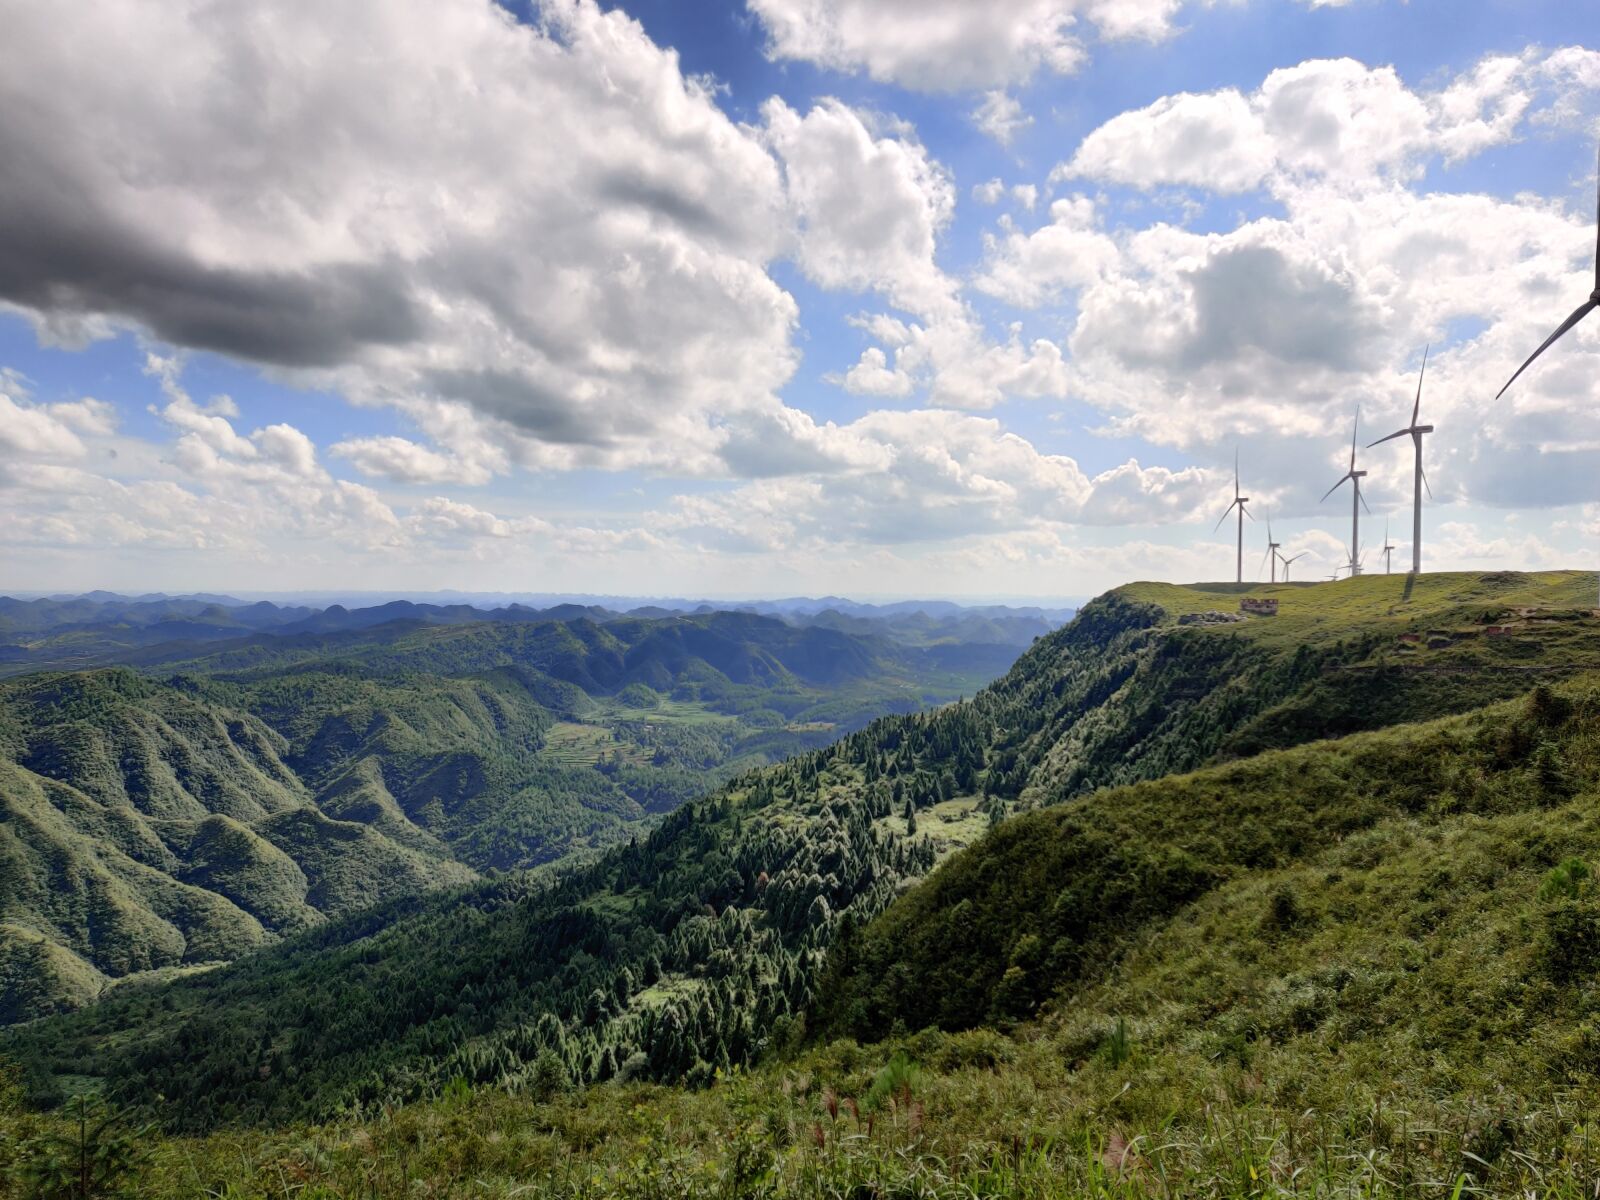 OnePlus GM1900 sample photo. Genting bivouac, wind power photography